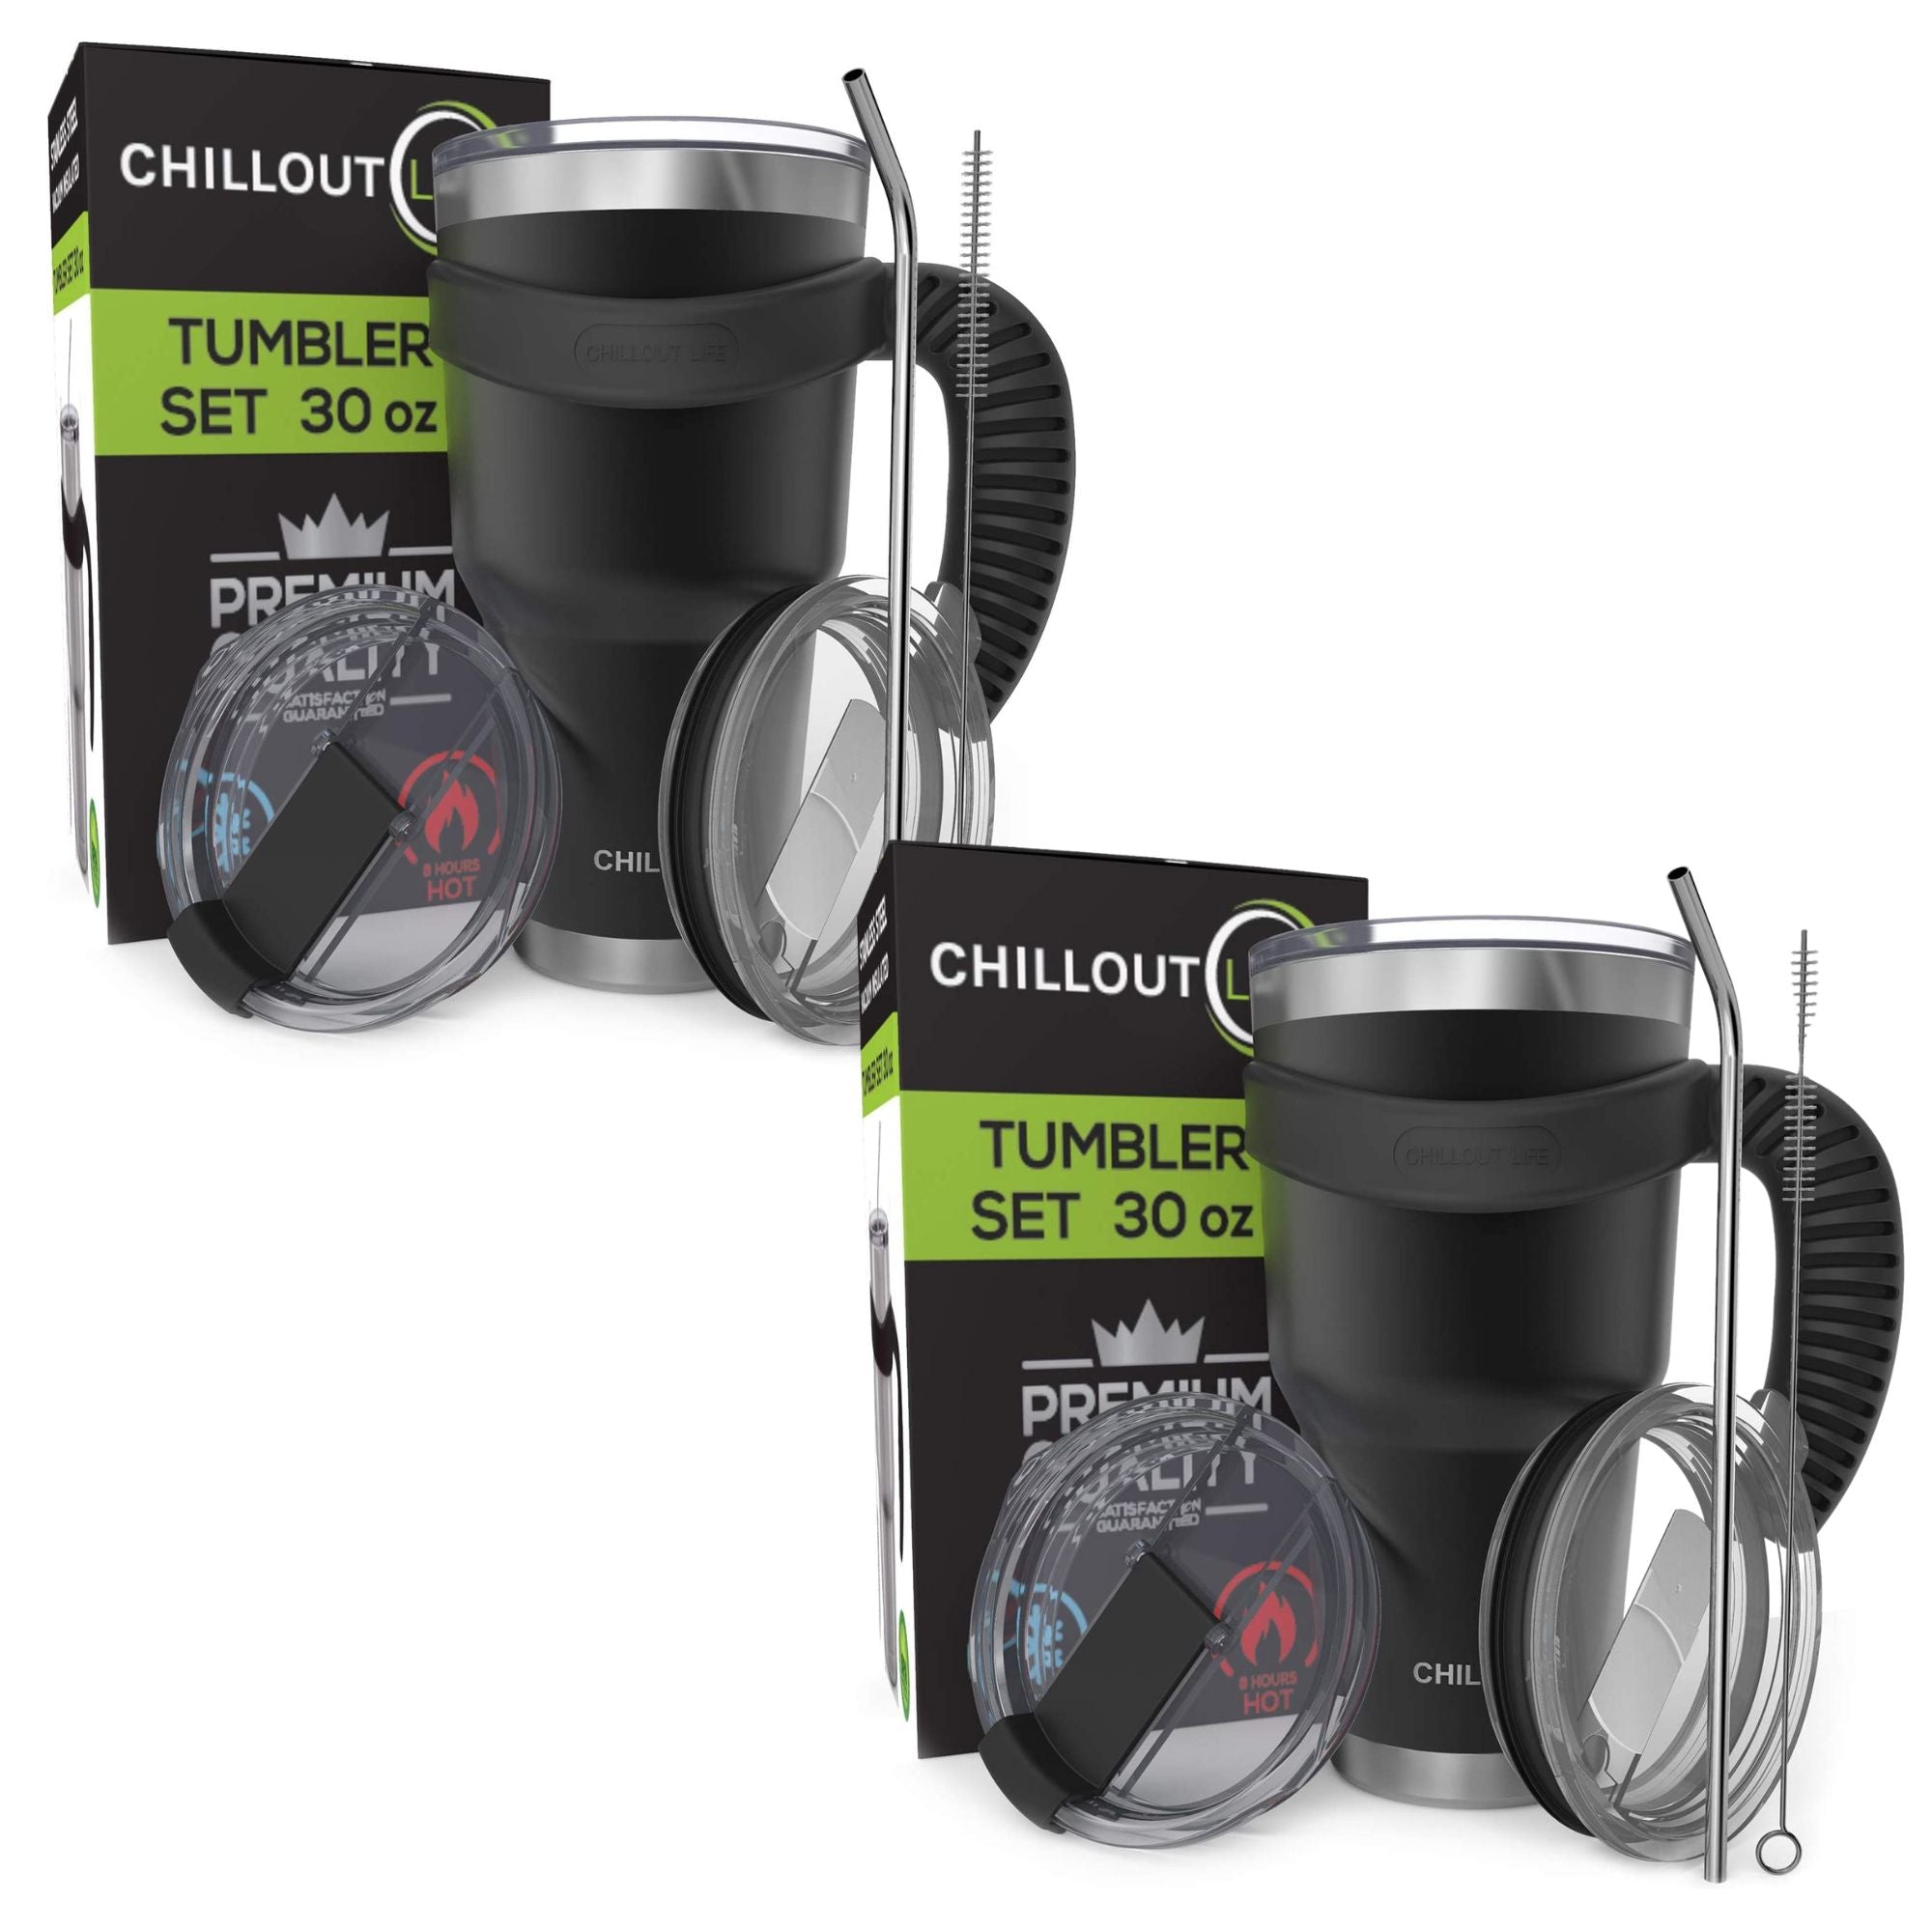 CHILLOUT LIFE Stainless Steel Insulated Coffee Mugs Set of 2 (14oz)